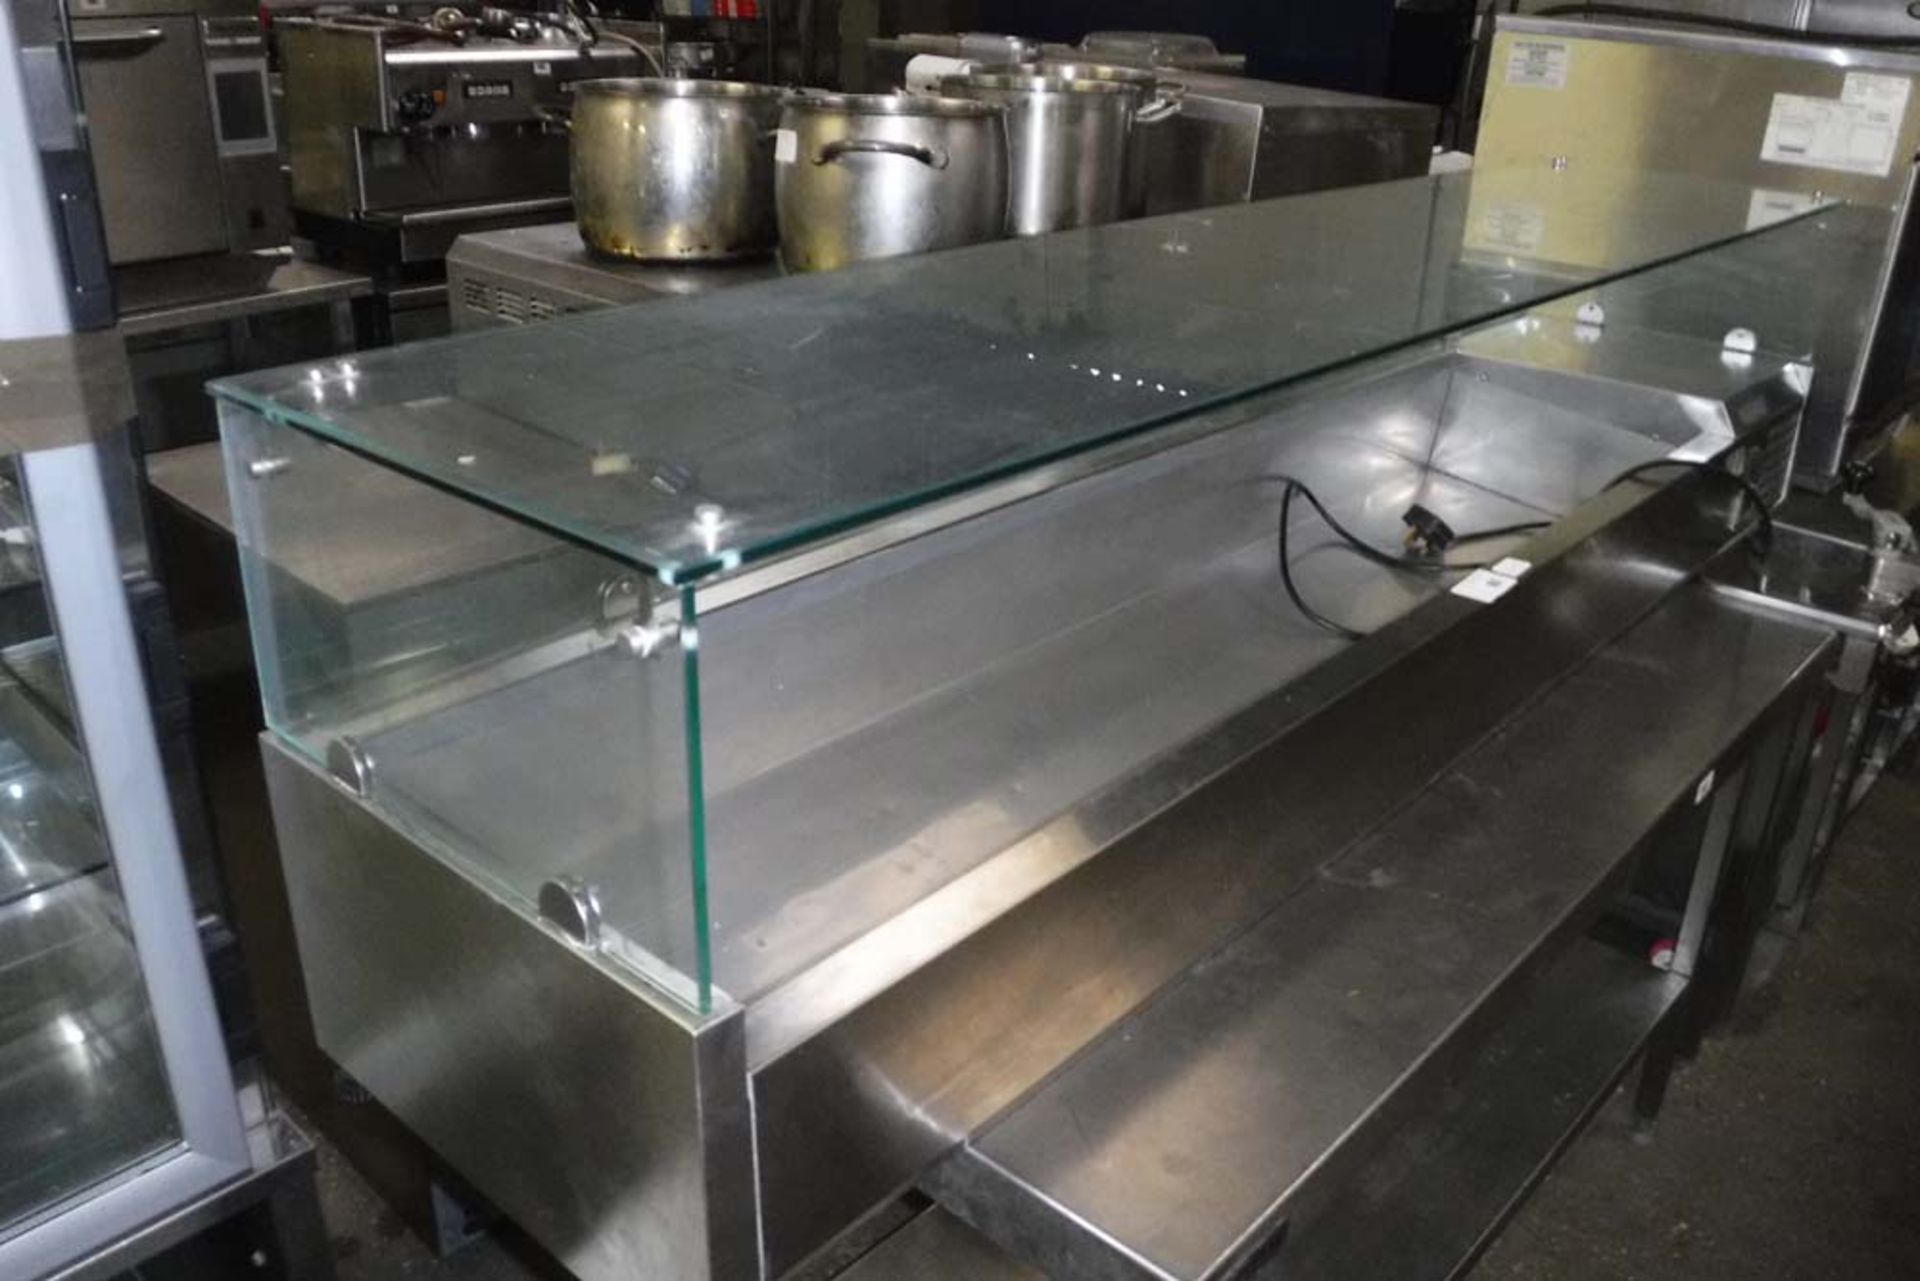 140cm refrigerated bench-top coldwell/salad bar (39)